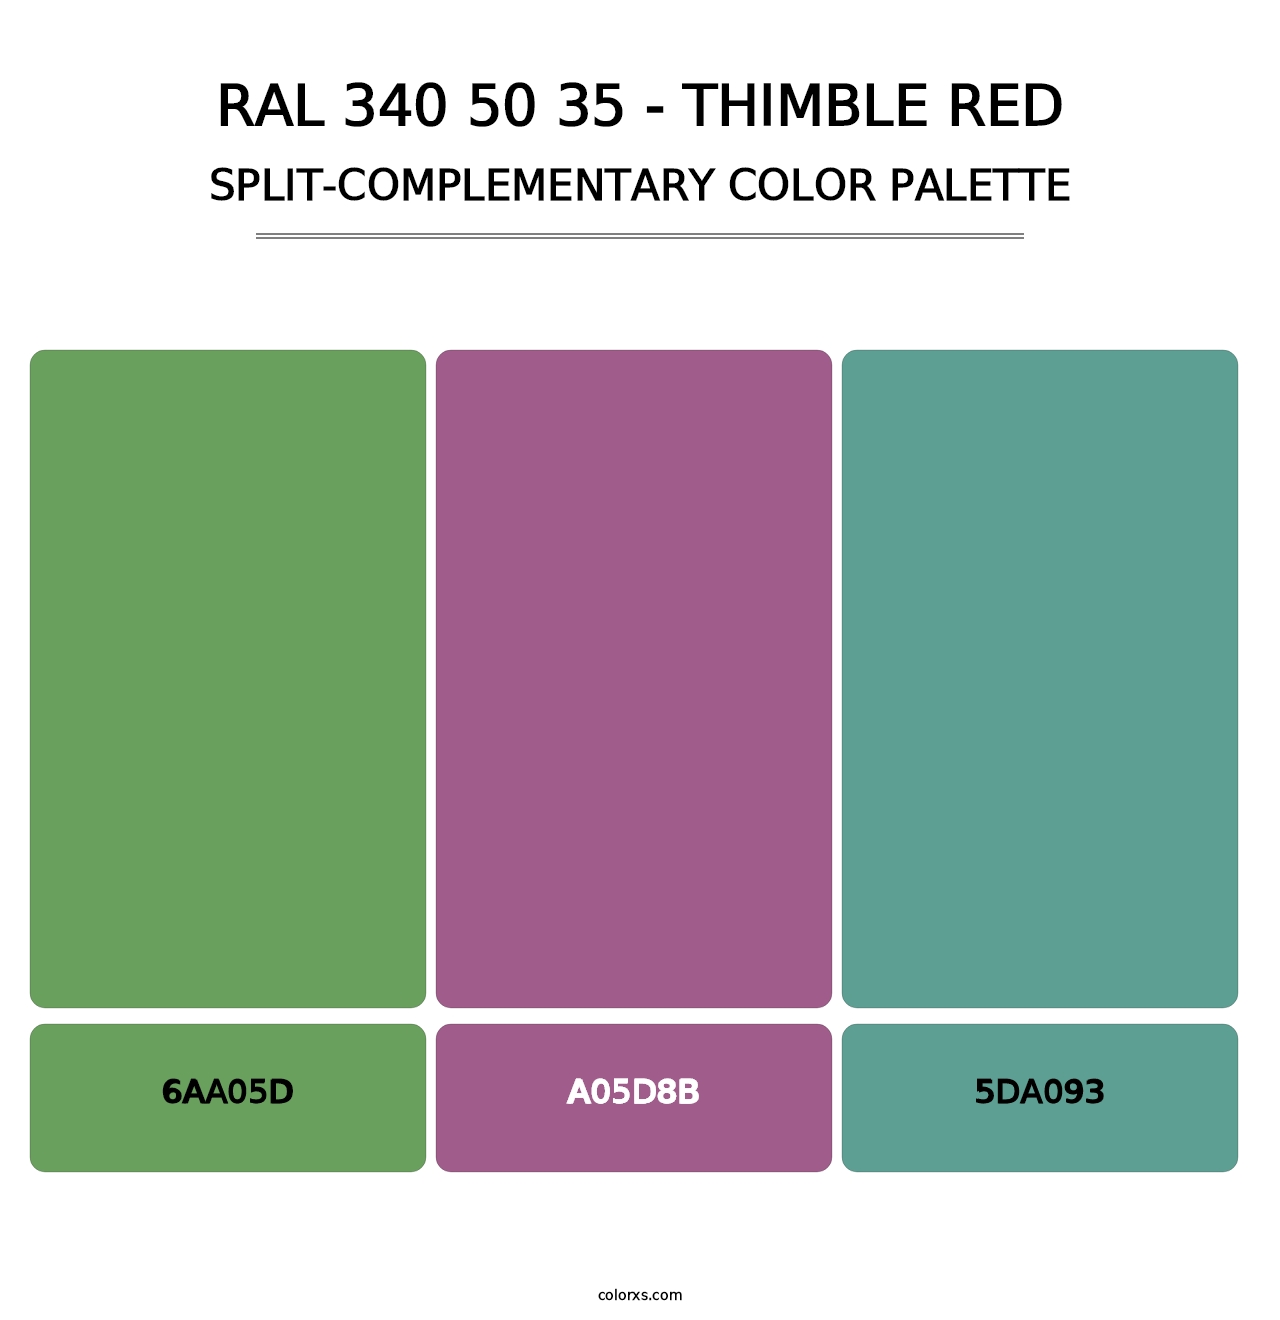 RAL 340 50 35 - Thimble Red - Split-Complementary Color Palette